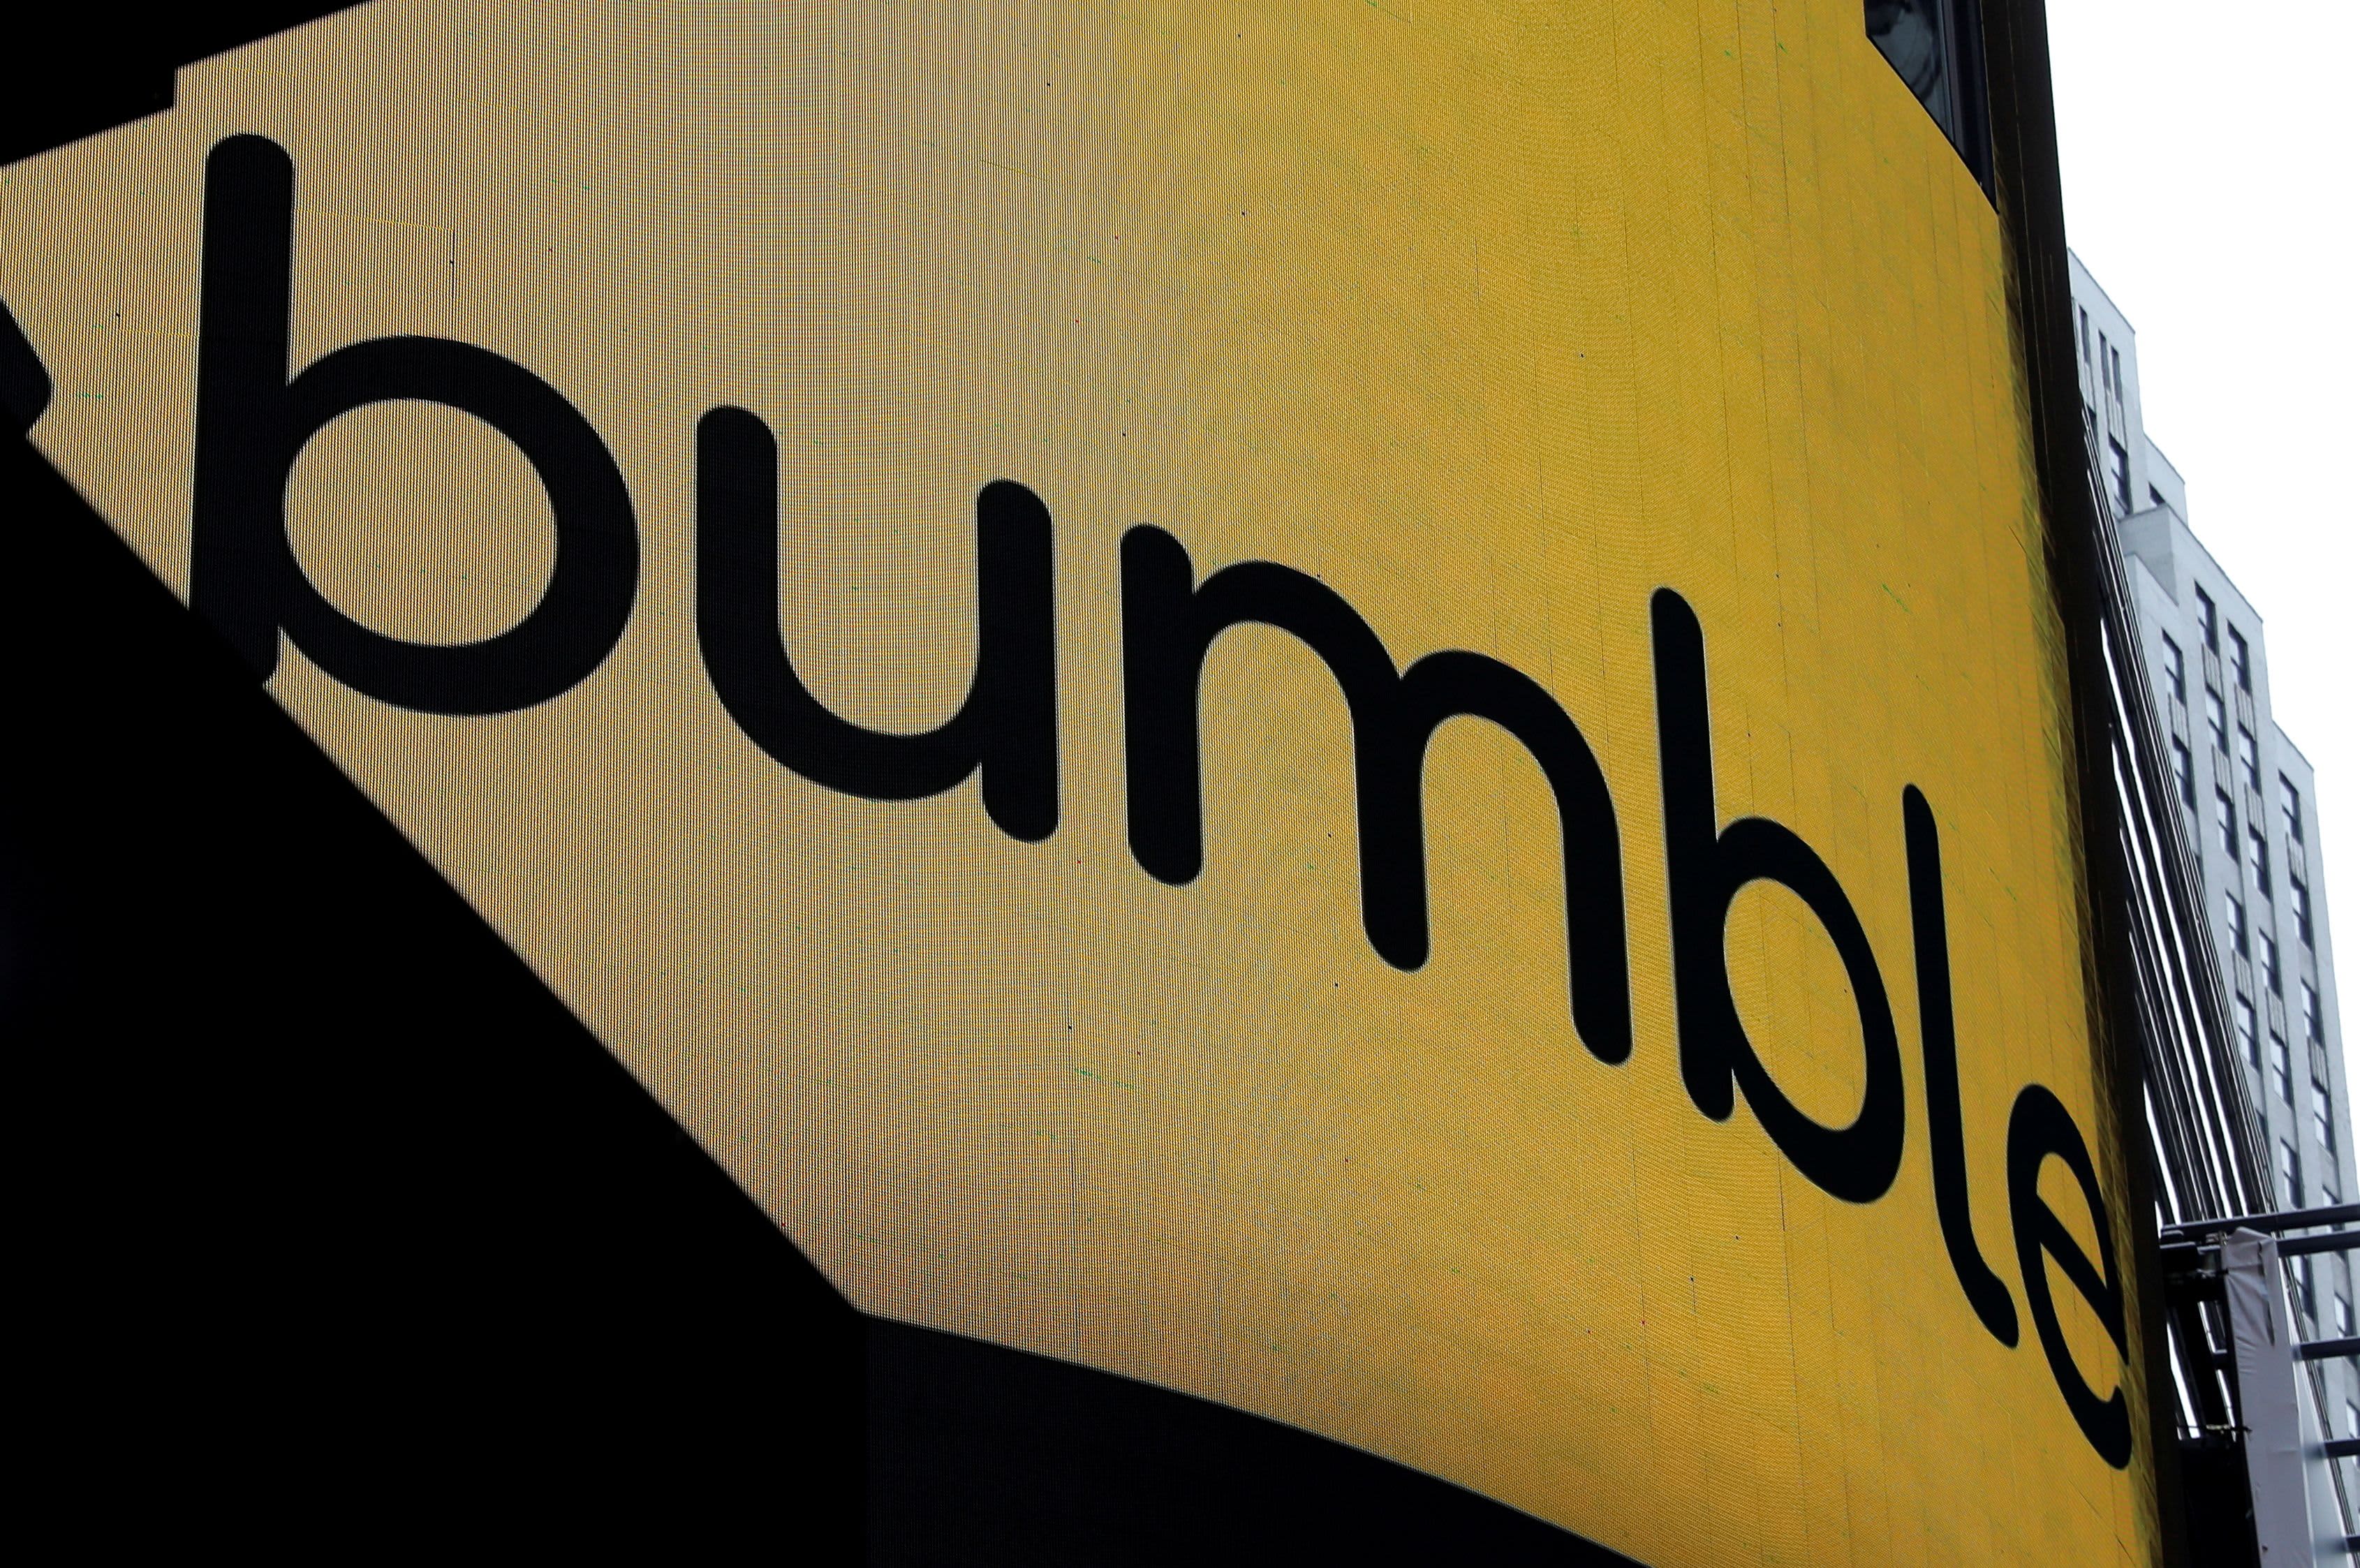 Jim Cramer recommends rivals Bumble and Match Group